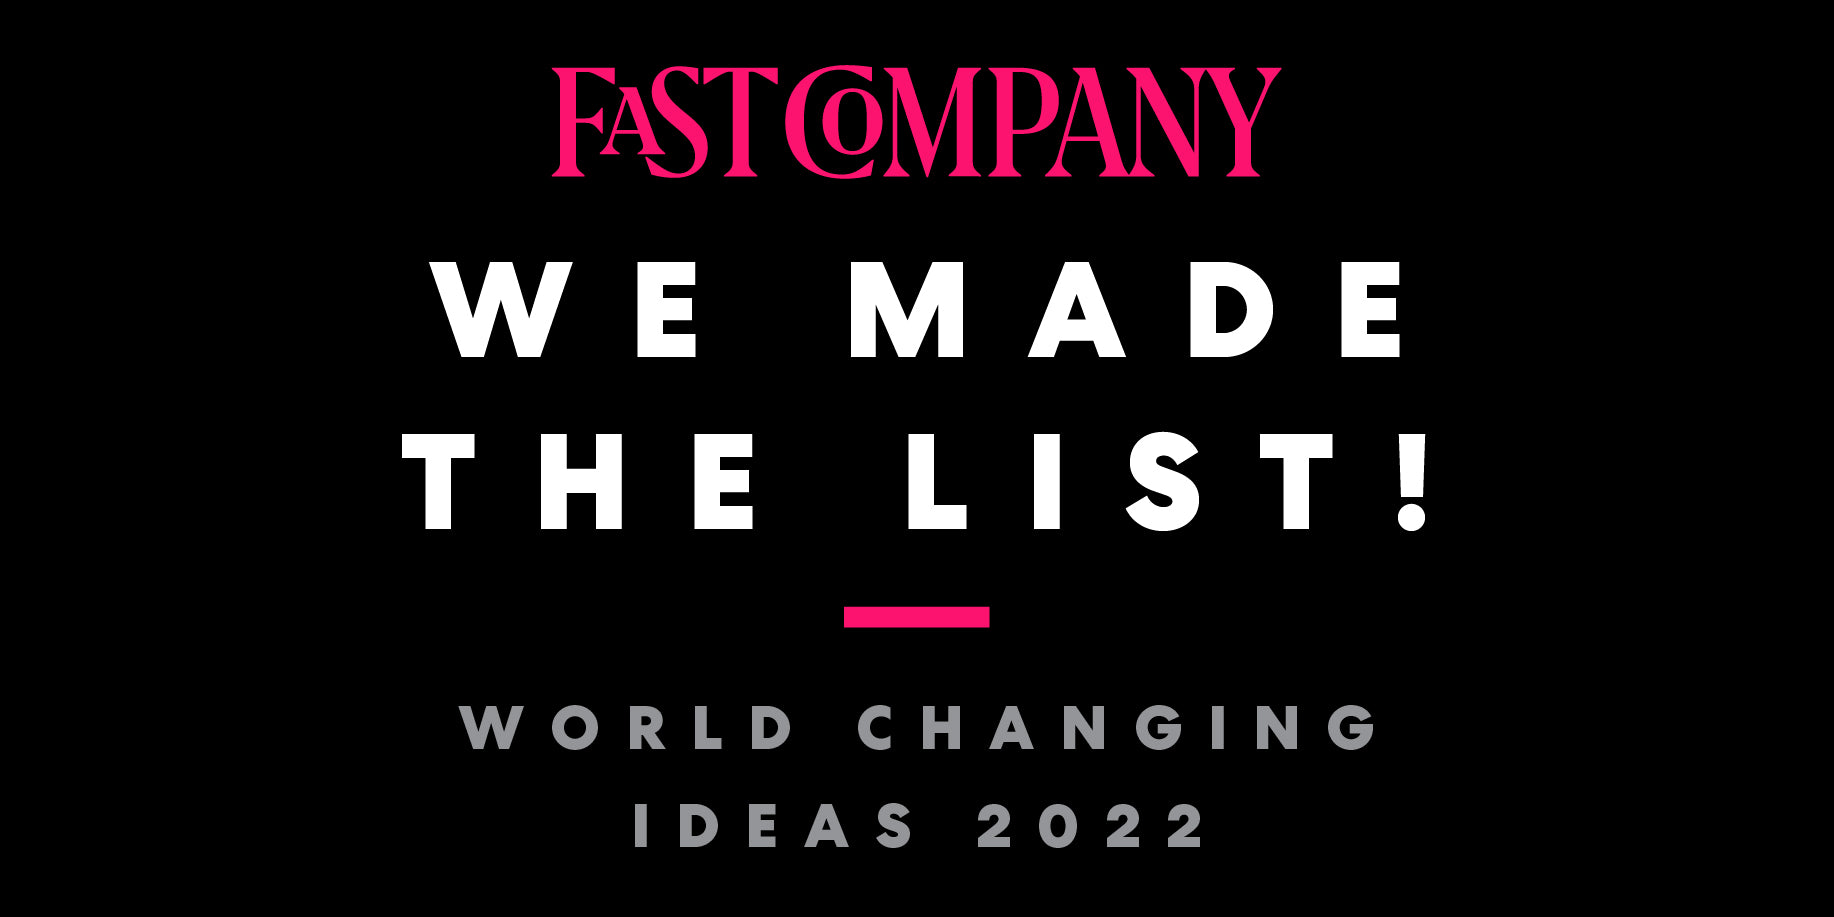 Mikuna is Honored by Fast Company's 2022 World Changing Ideas Awards